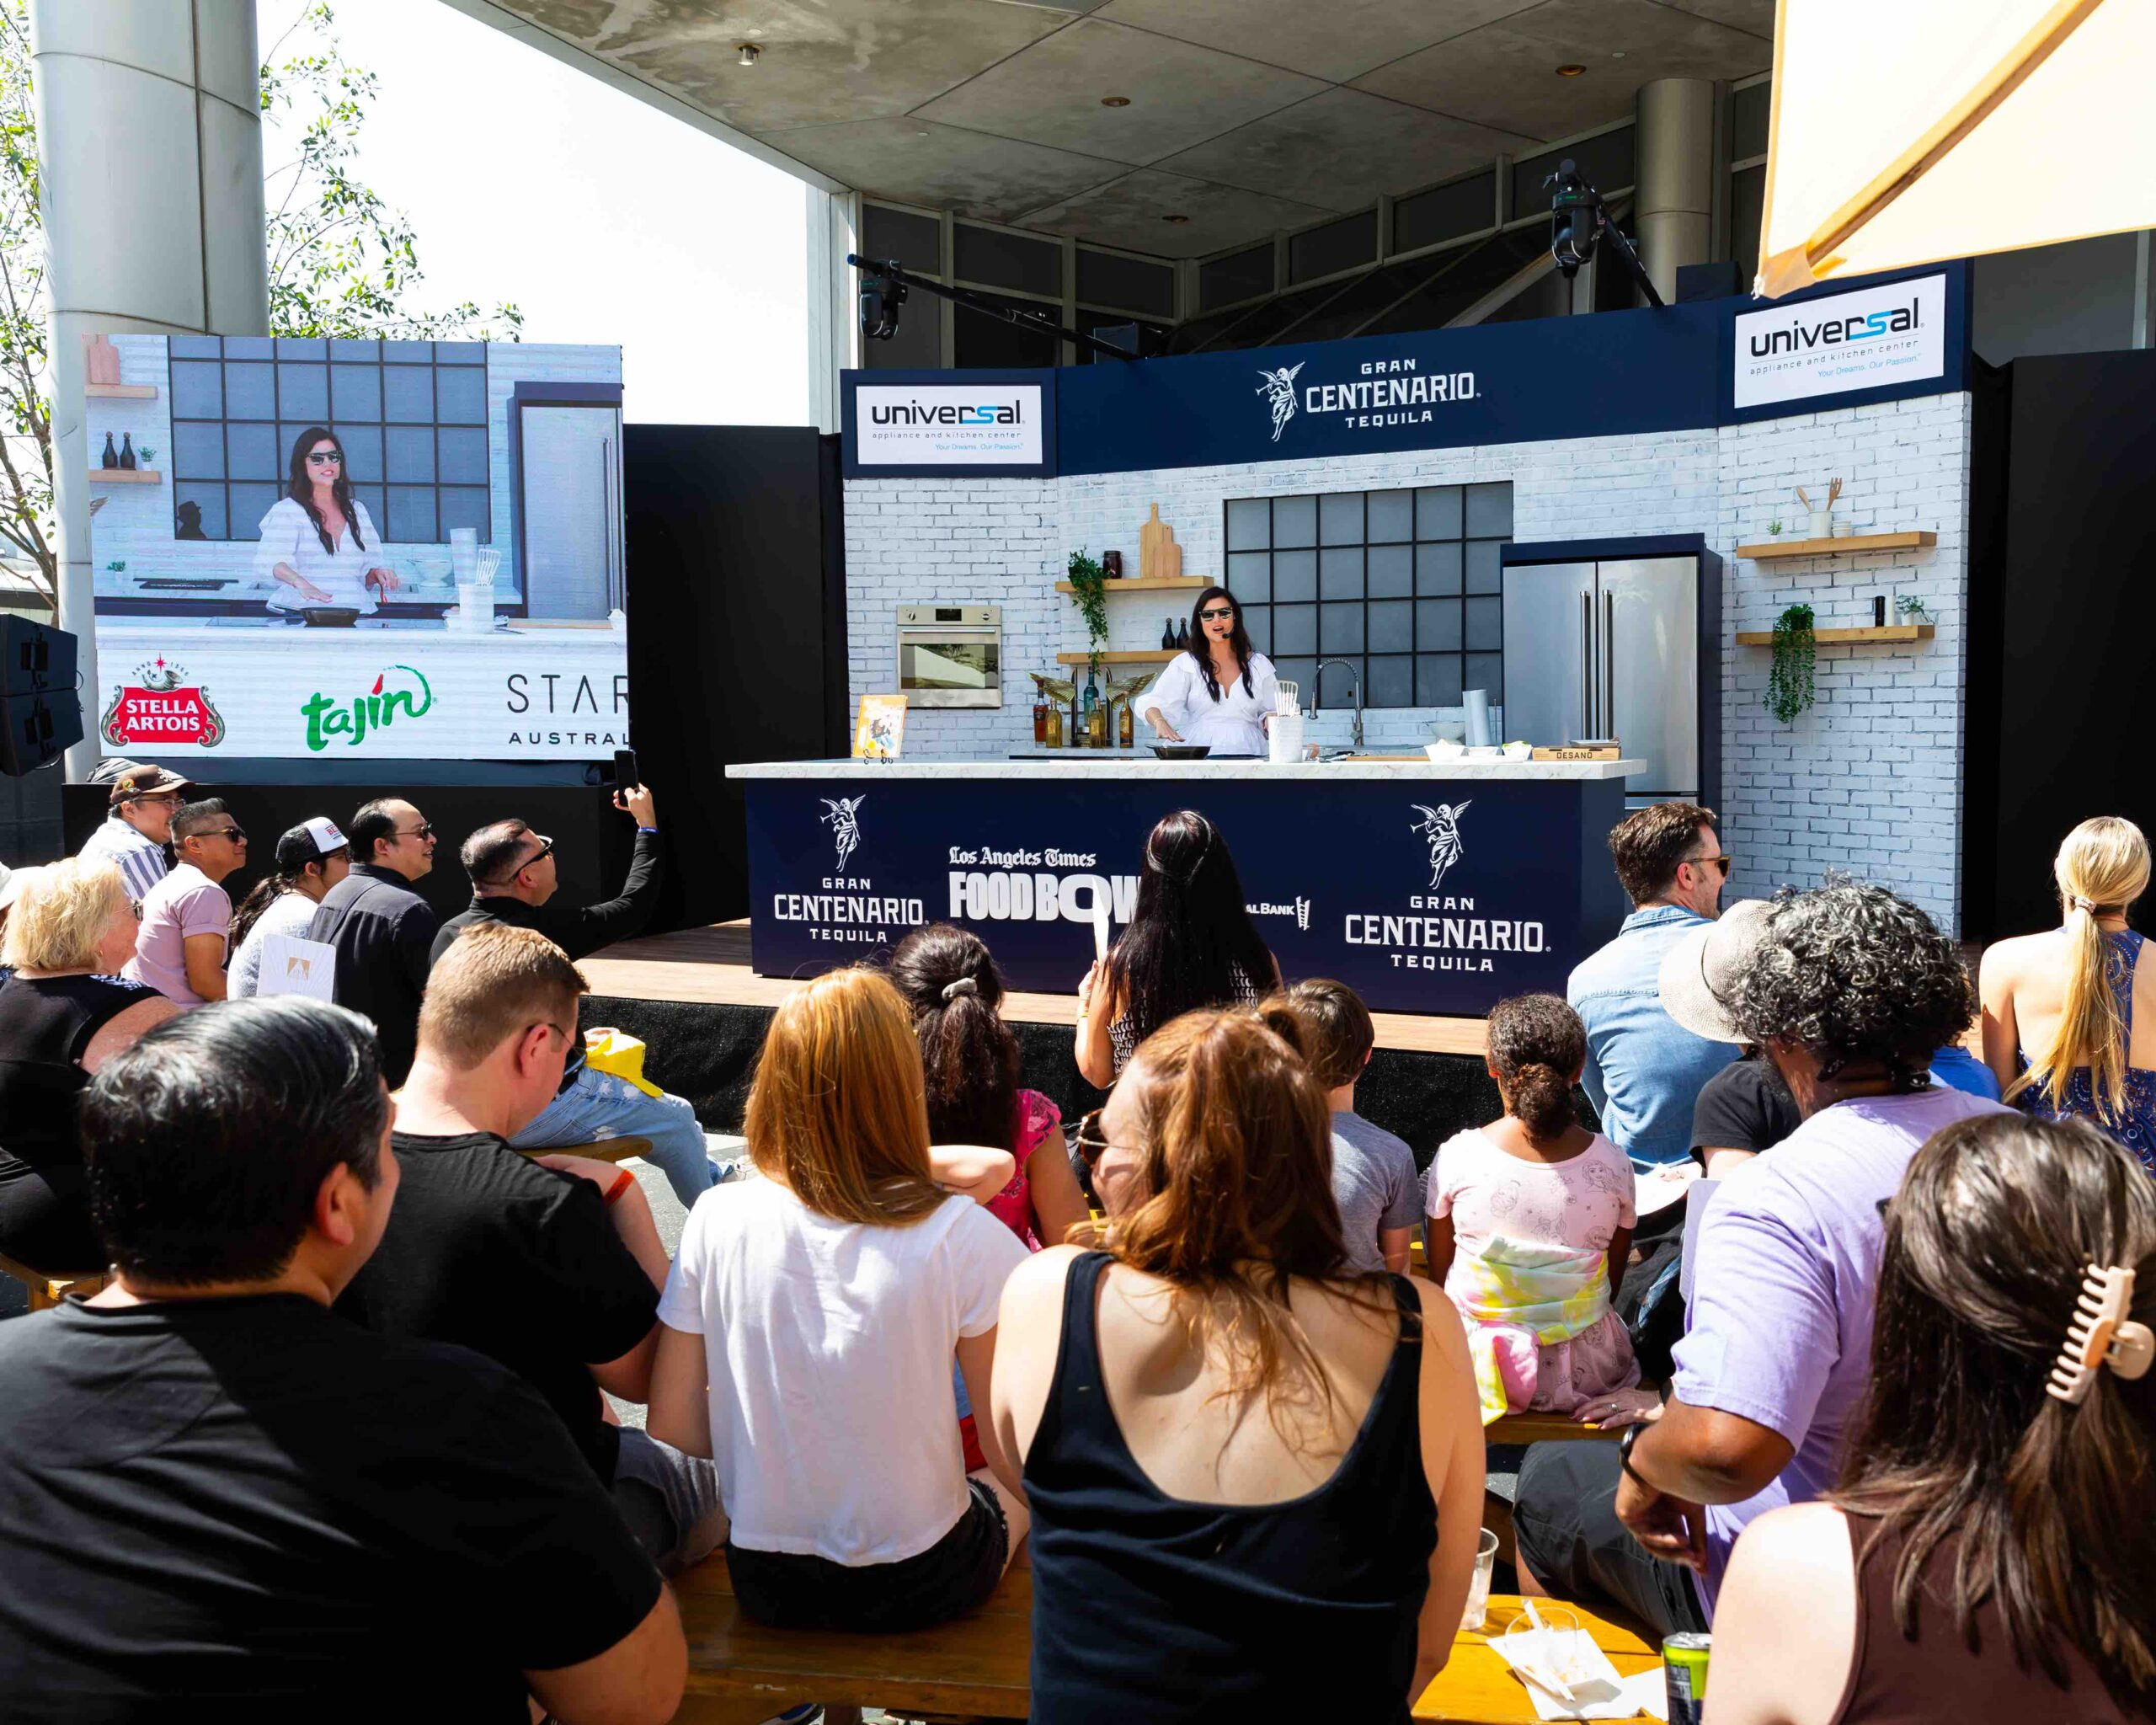 An image of Tiffani Thiessen's live cooking demo from the L.A. Times Food Bowl.
